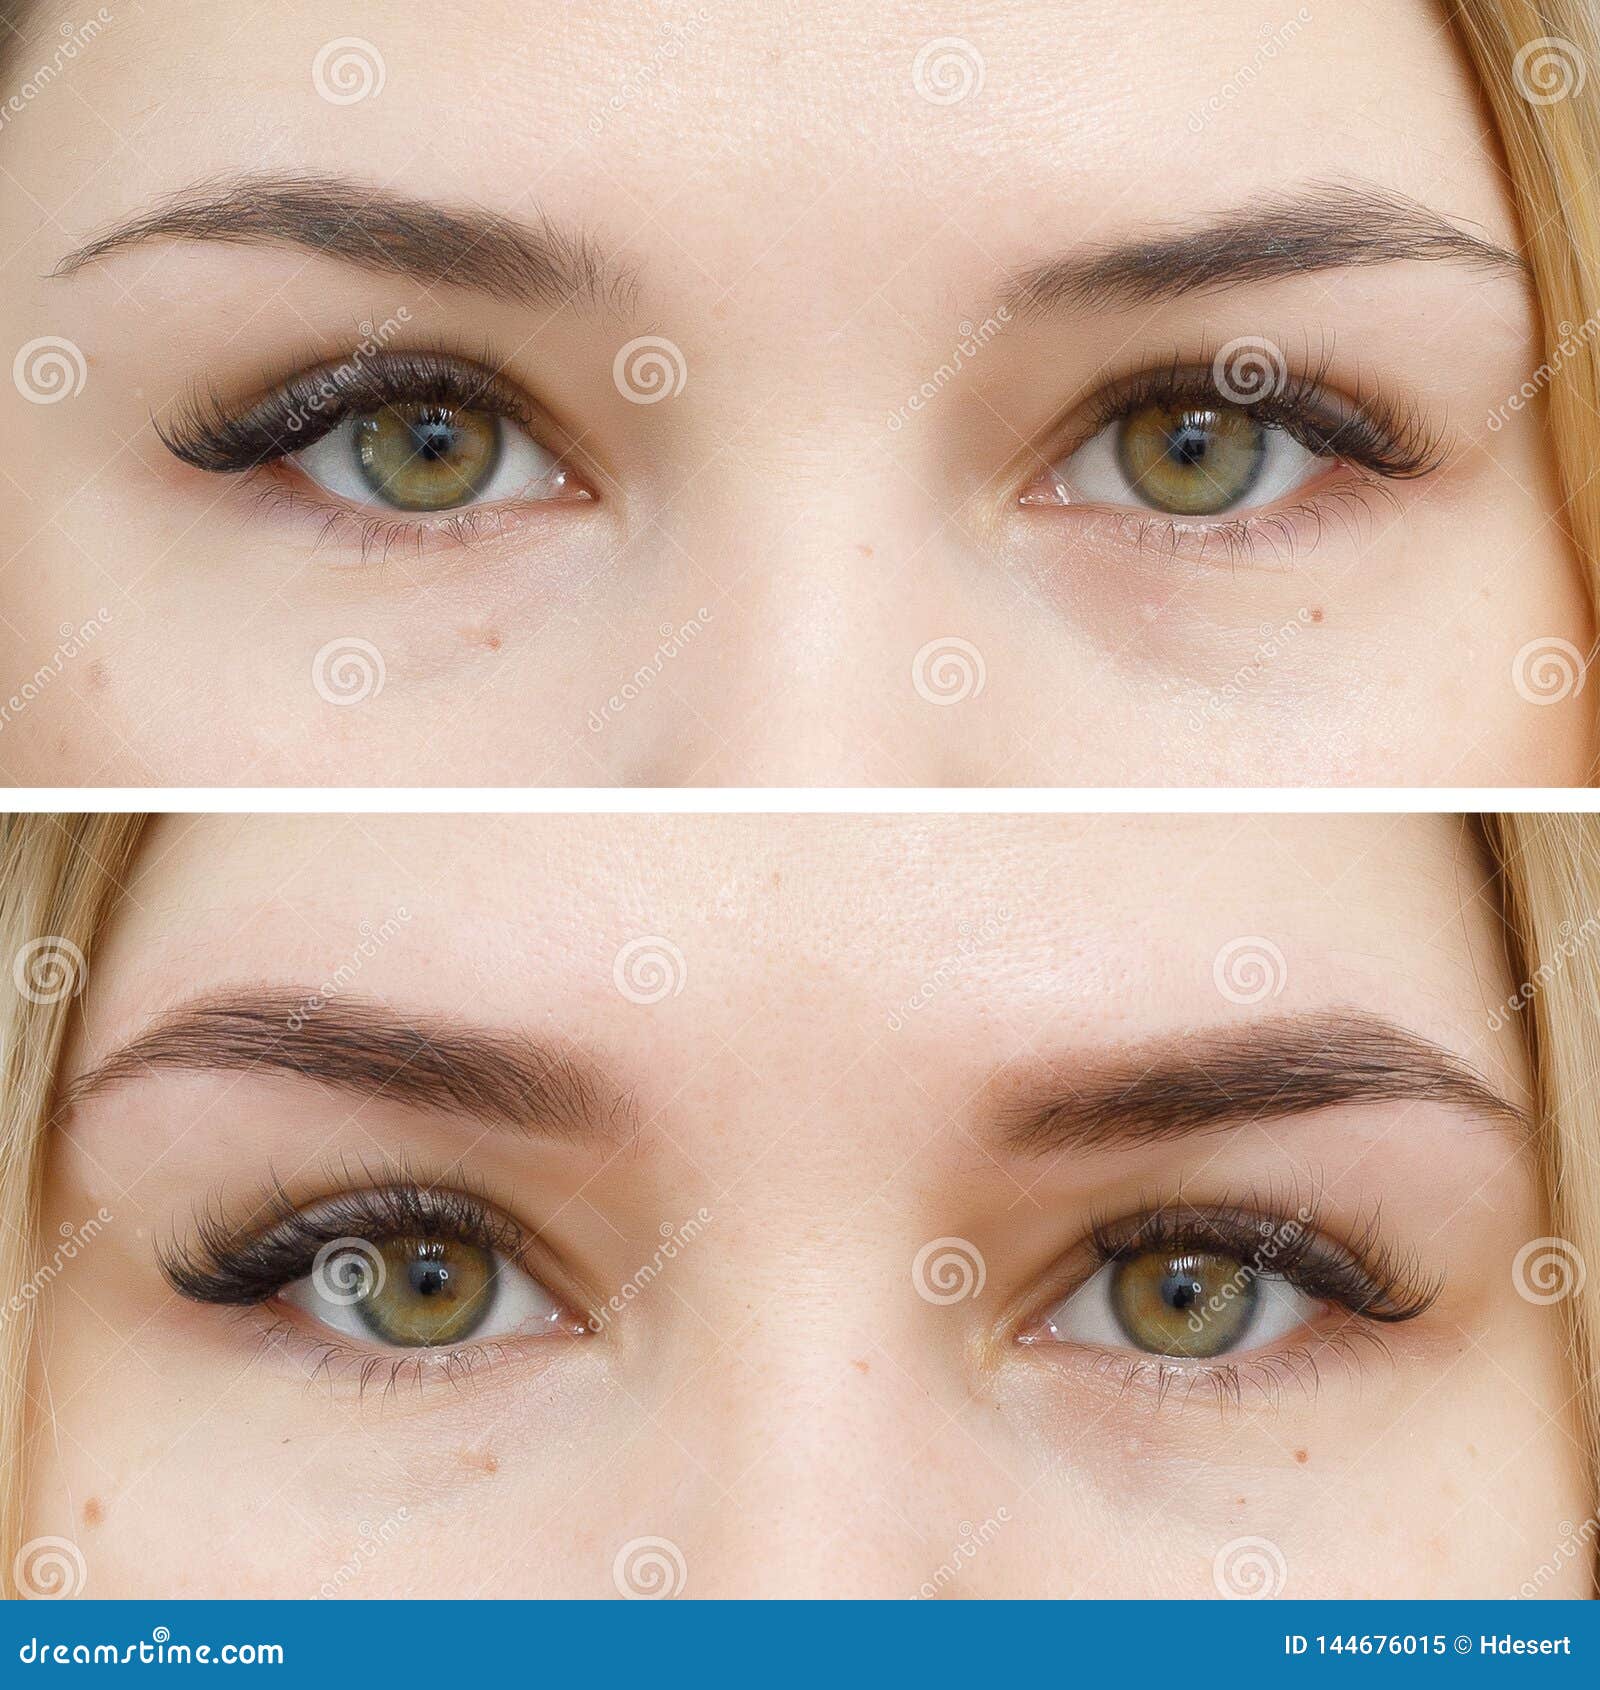 photo comparison before and after permanent makeup, tattooing of eyebrows